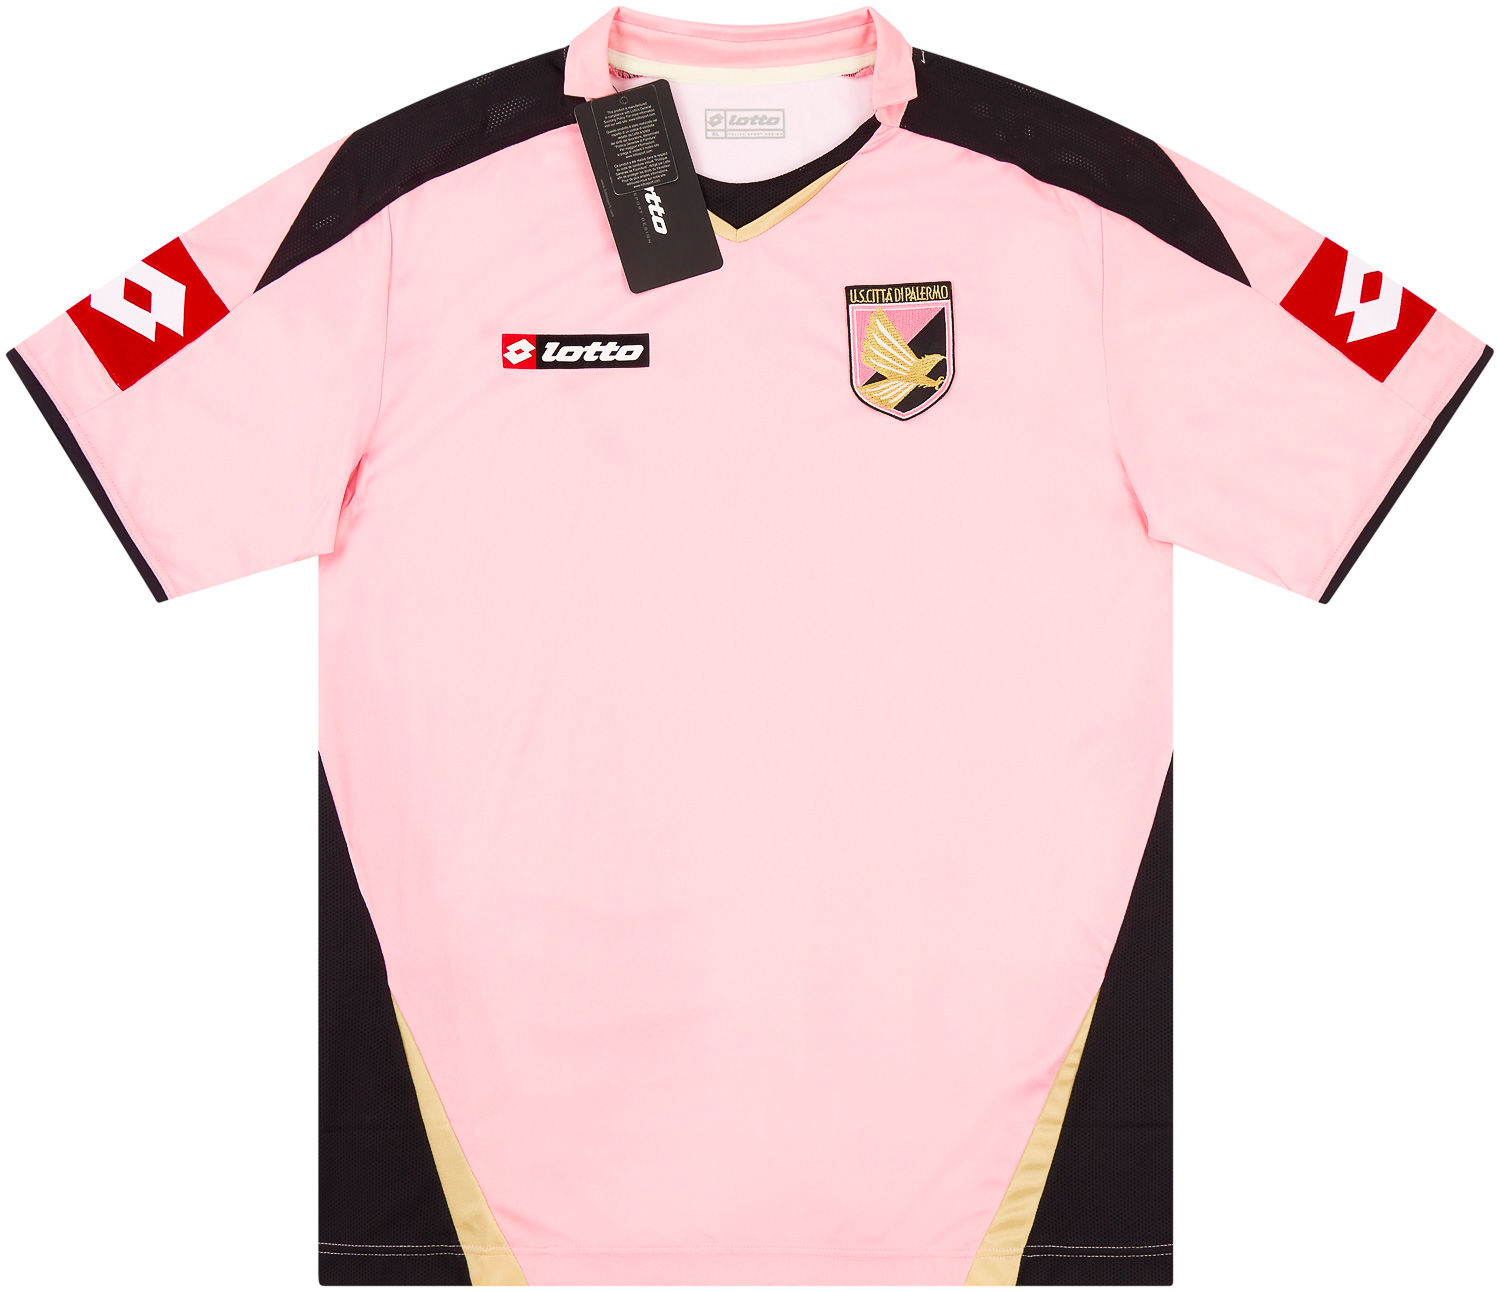 2007-08 Palermo Home Shirt *New w/ Defects*